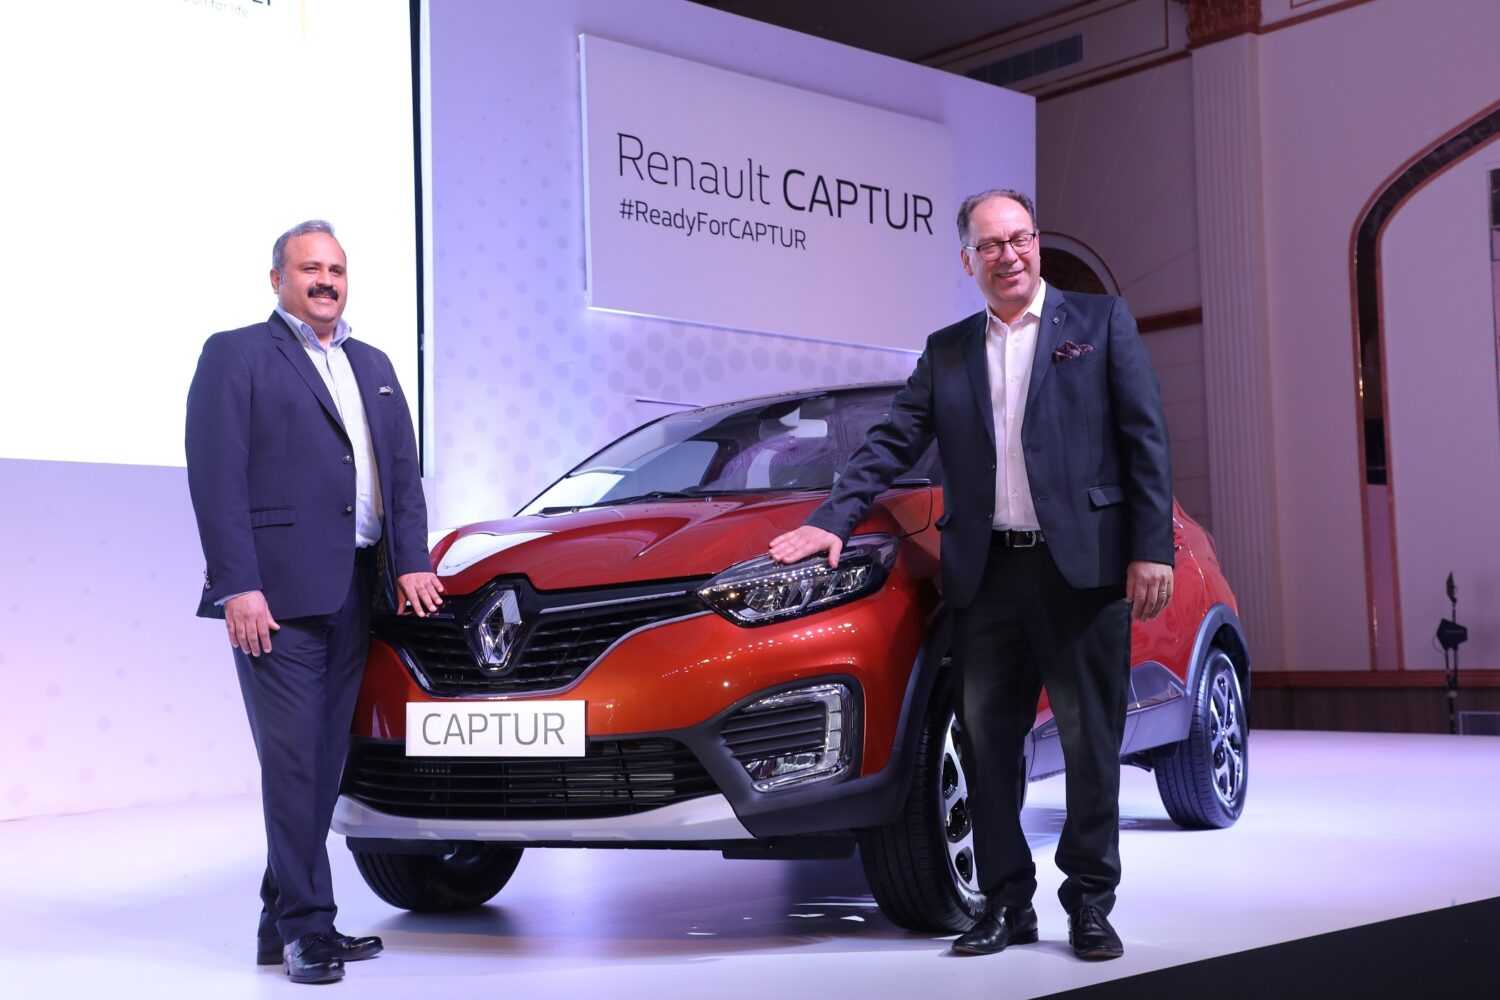 Renault Captur available for sale in India